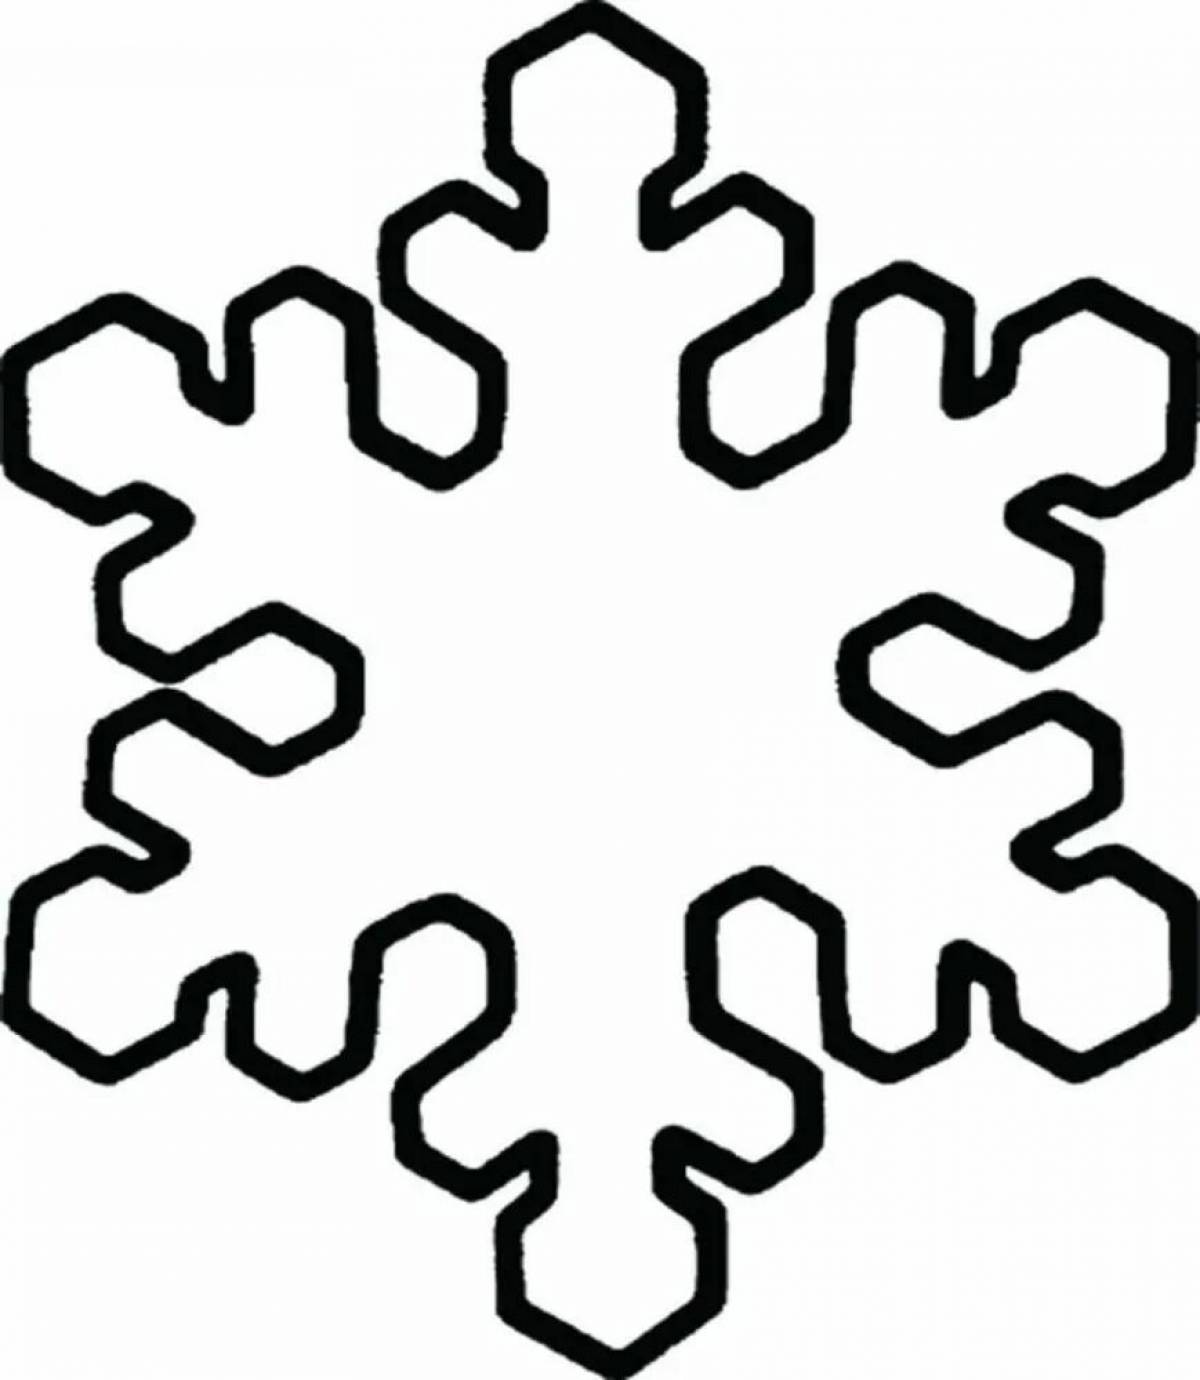 Coloring page wonderful pattern with snowflakes